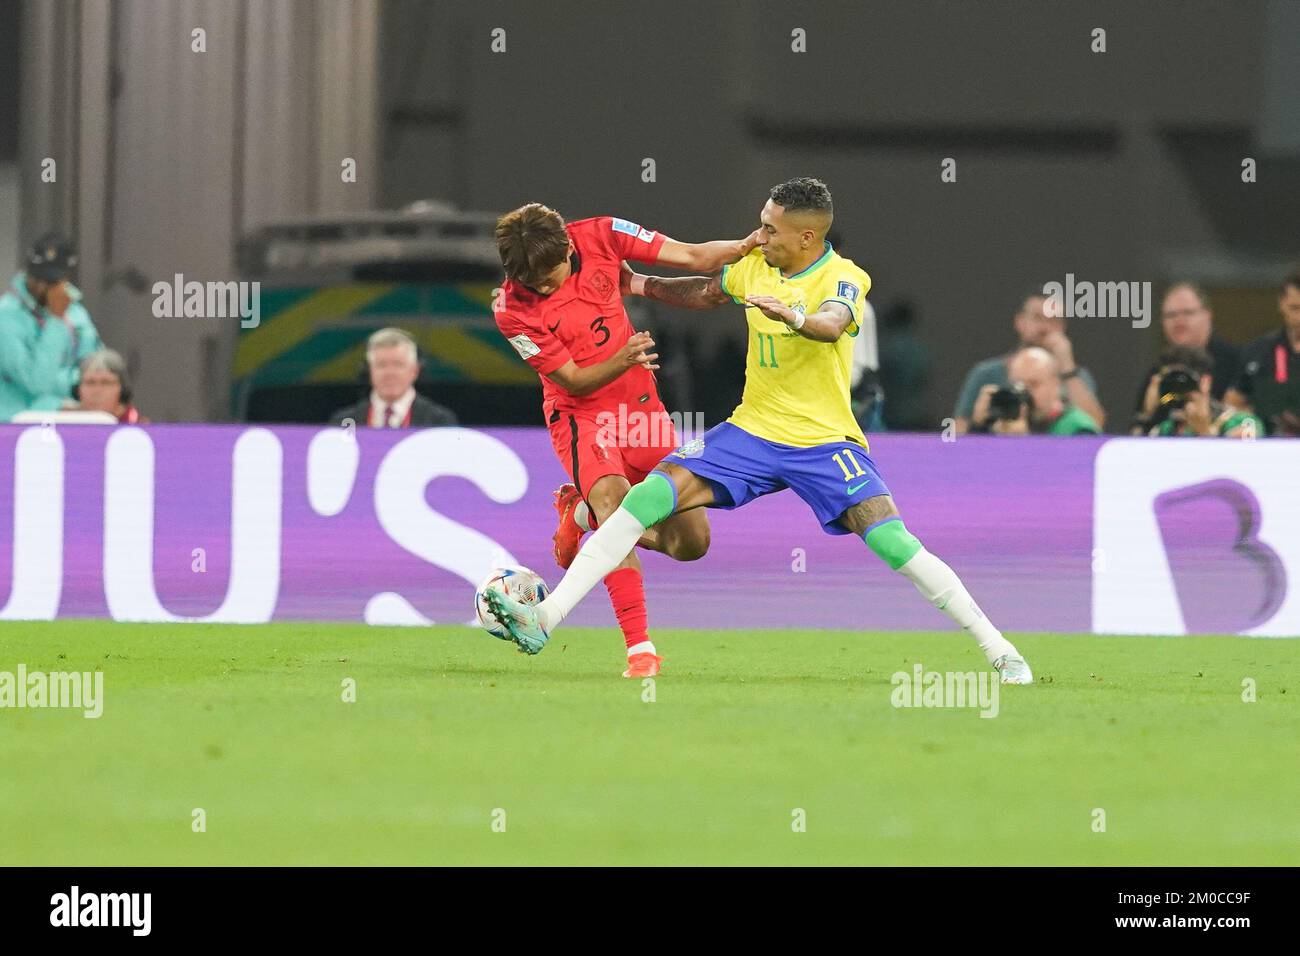 Doha, Qatar. 05th Dec, 2022. Stadium 974 DOHA, QATAR - DECEMBER 5: Player of Brazil Raphinha fights for the ball with player of South Korea Kim Jin-su during the FIFA World Cup Qatar 2022 Round of 16 match between Brazil and South Korea at Stadium 974 on December 5, 2022 in Doha, Qatar. (Photo by Florencia Tan Jun/PxImages) (Florencia Tan Jun/SPP) Credit: SPP Sport Press Photo. /Alamy Live News Stock Photo